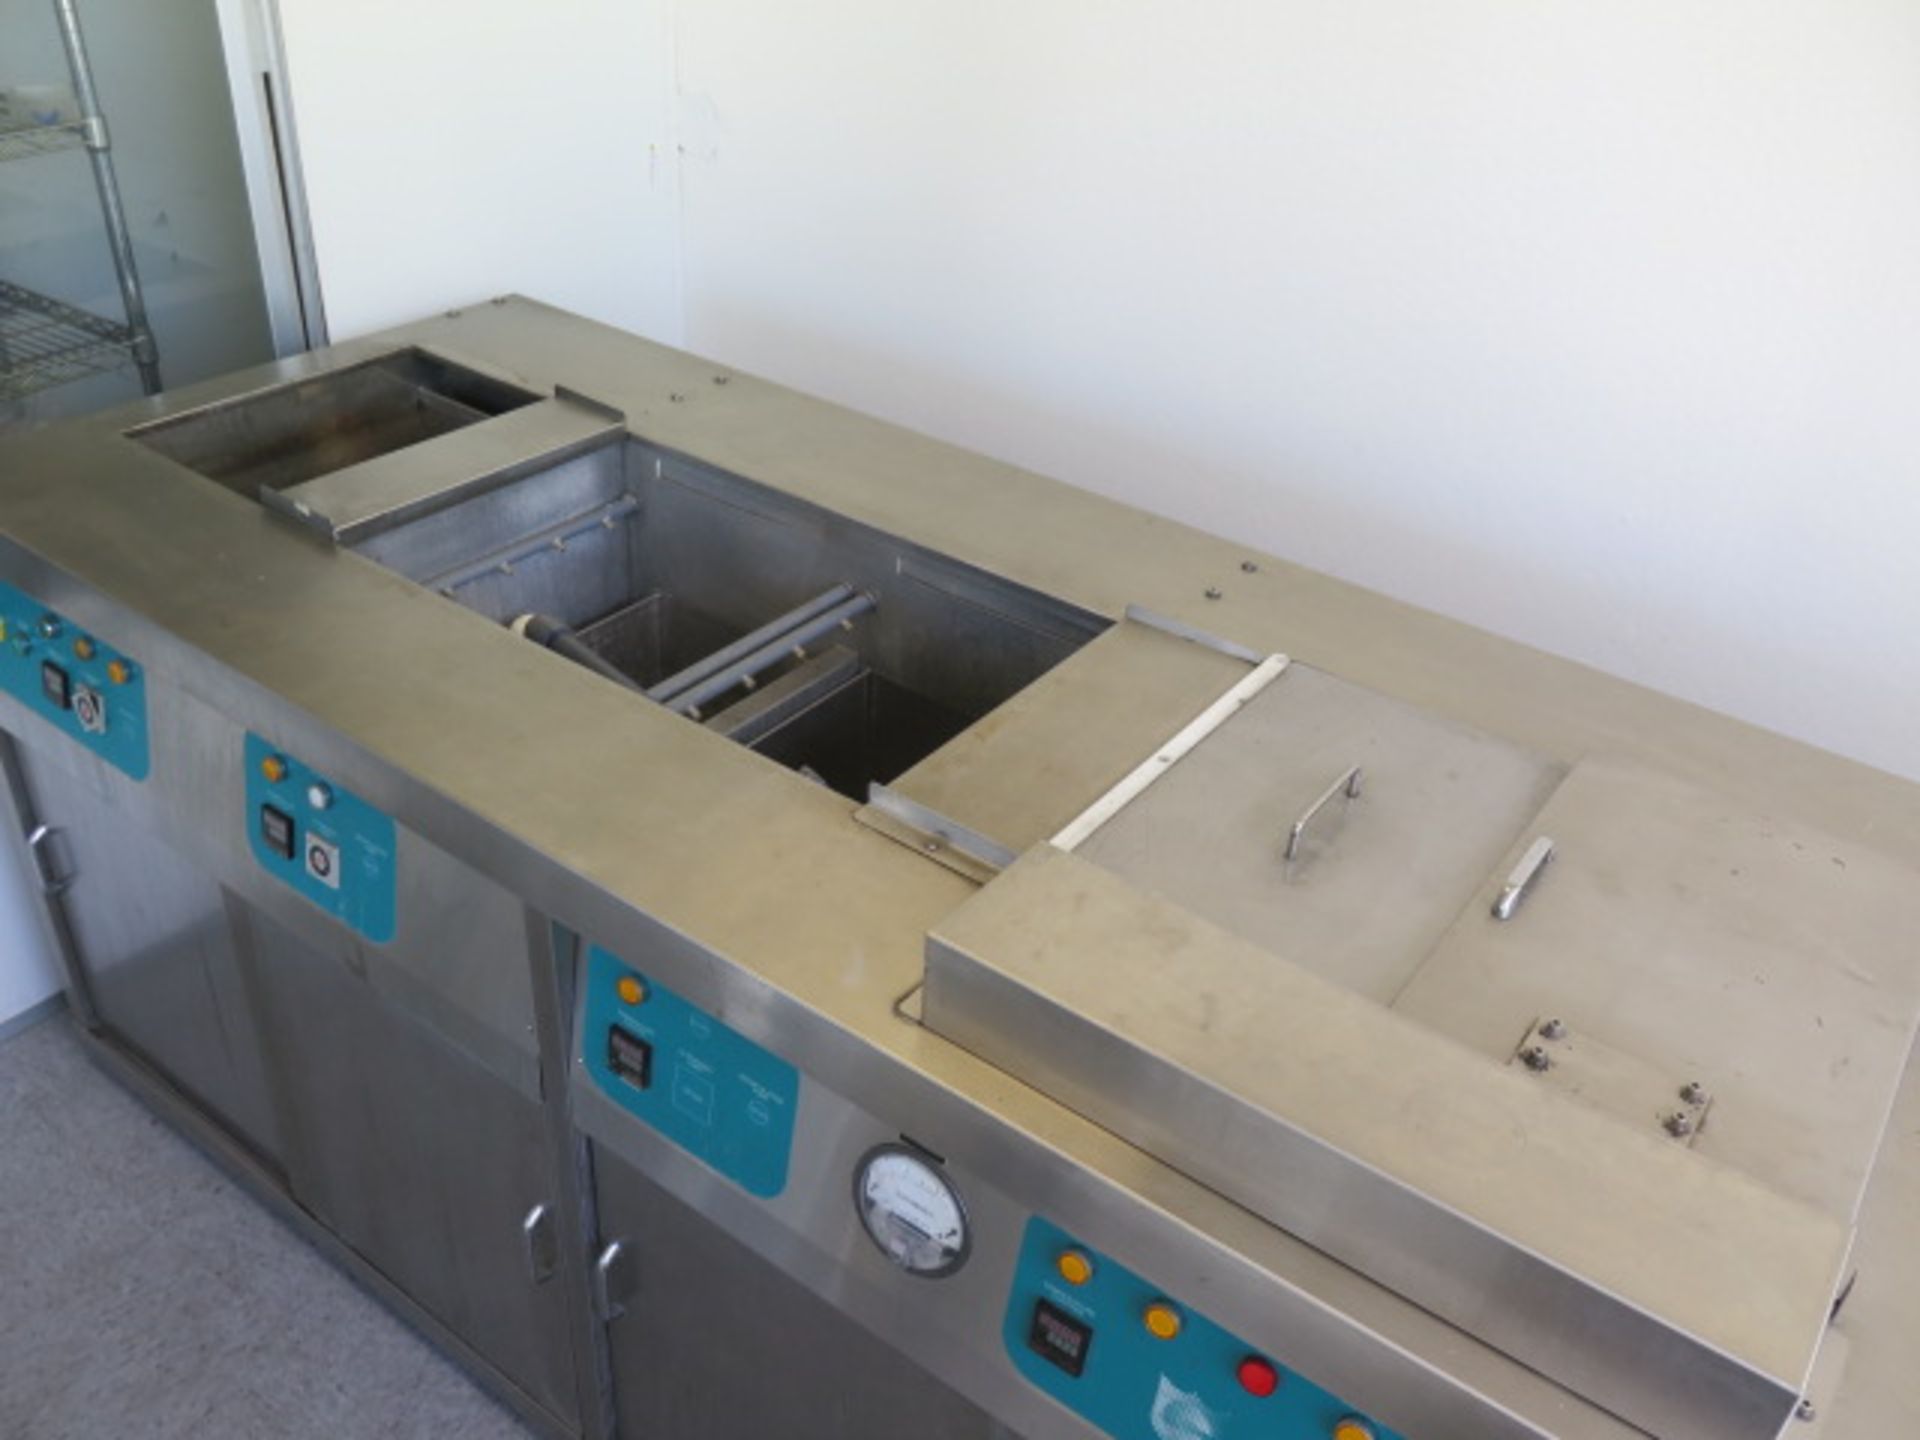 Crest Ultrasonic mdl. OC4-1218-HE 4-Station Ultrasonic Cleaning System s/n 0702-T-0484, SOLD AS IS - Image 2 of 10